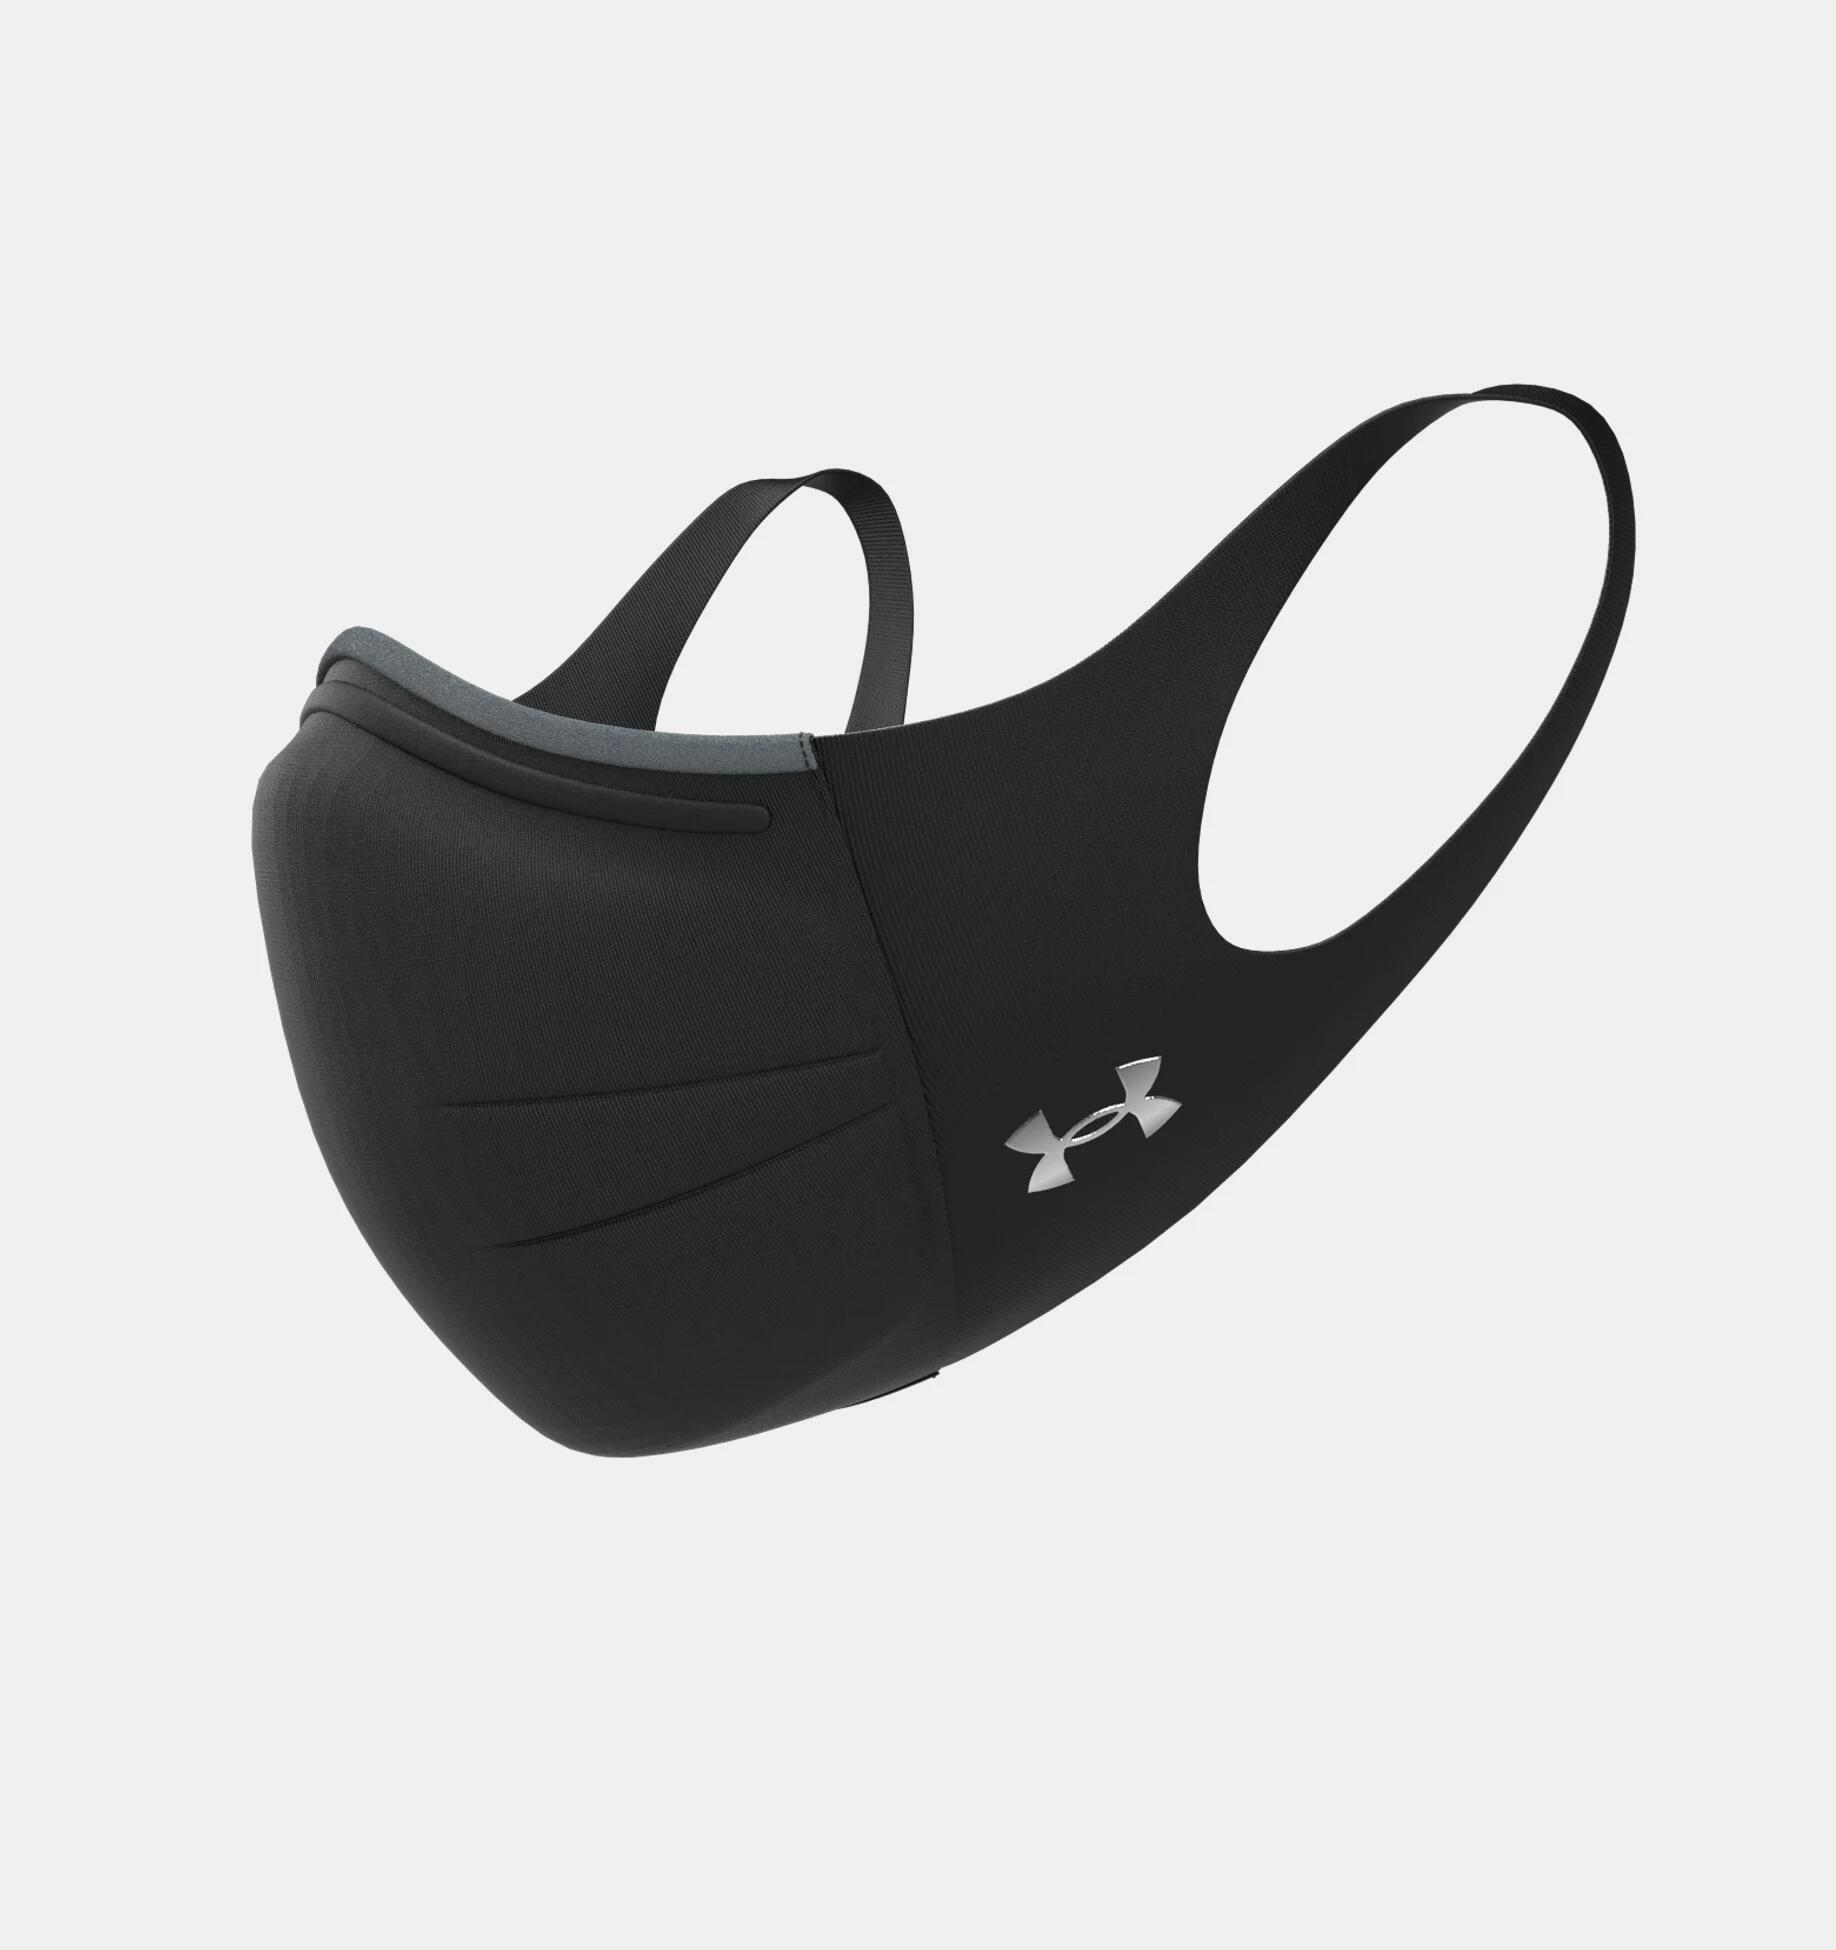 UNDER ARMOUR <strong>アンダーアーマー</strong> UA スポーツ<strong>マスク</strong> フェザーウエイト 軽量 Black / Silver Chrome - 001